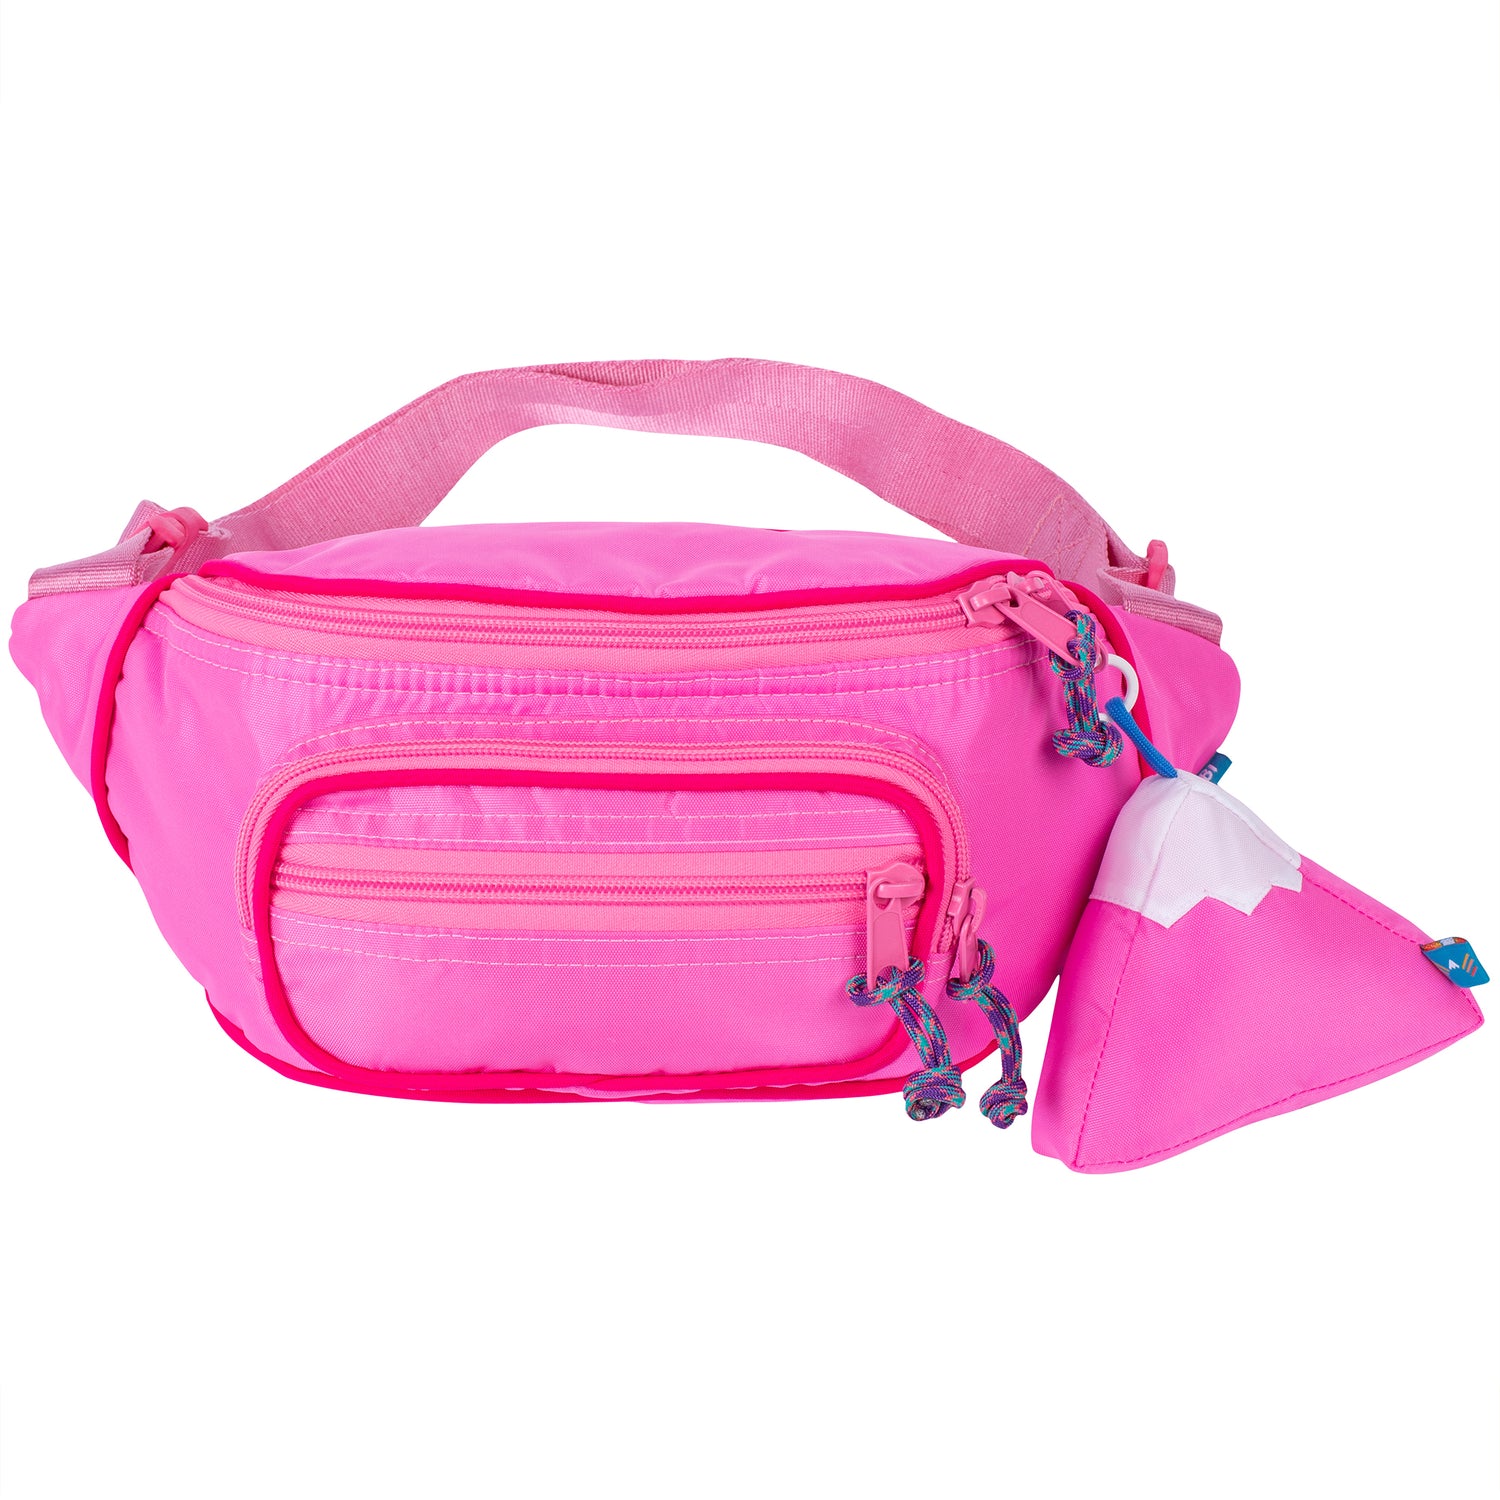 Large fanny pack sling in a light pink color with a mountain design keychain